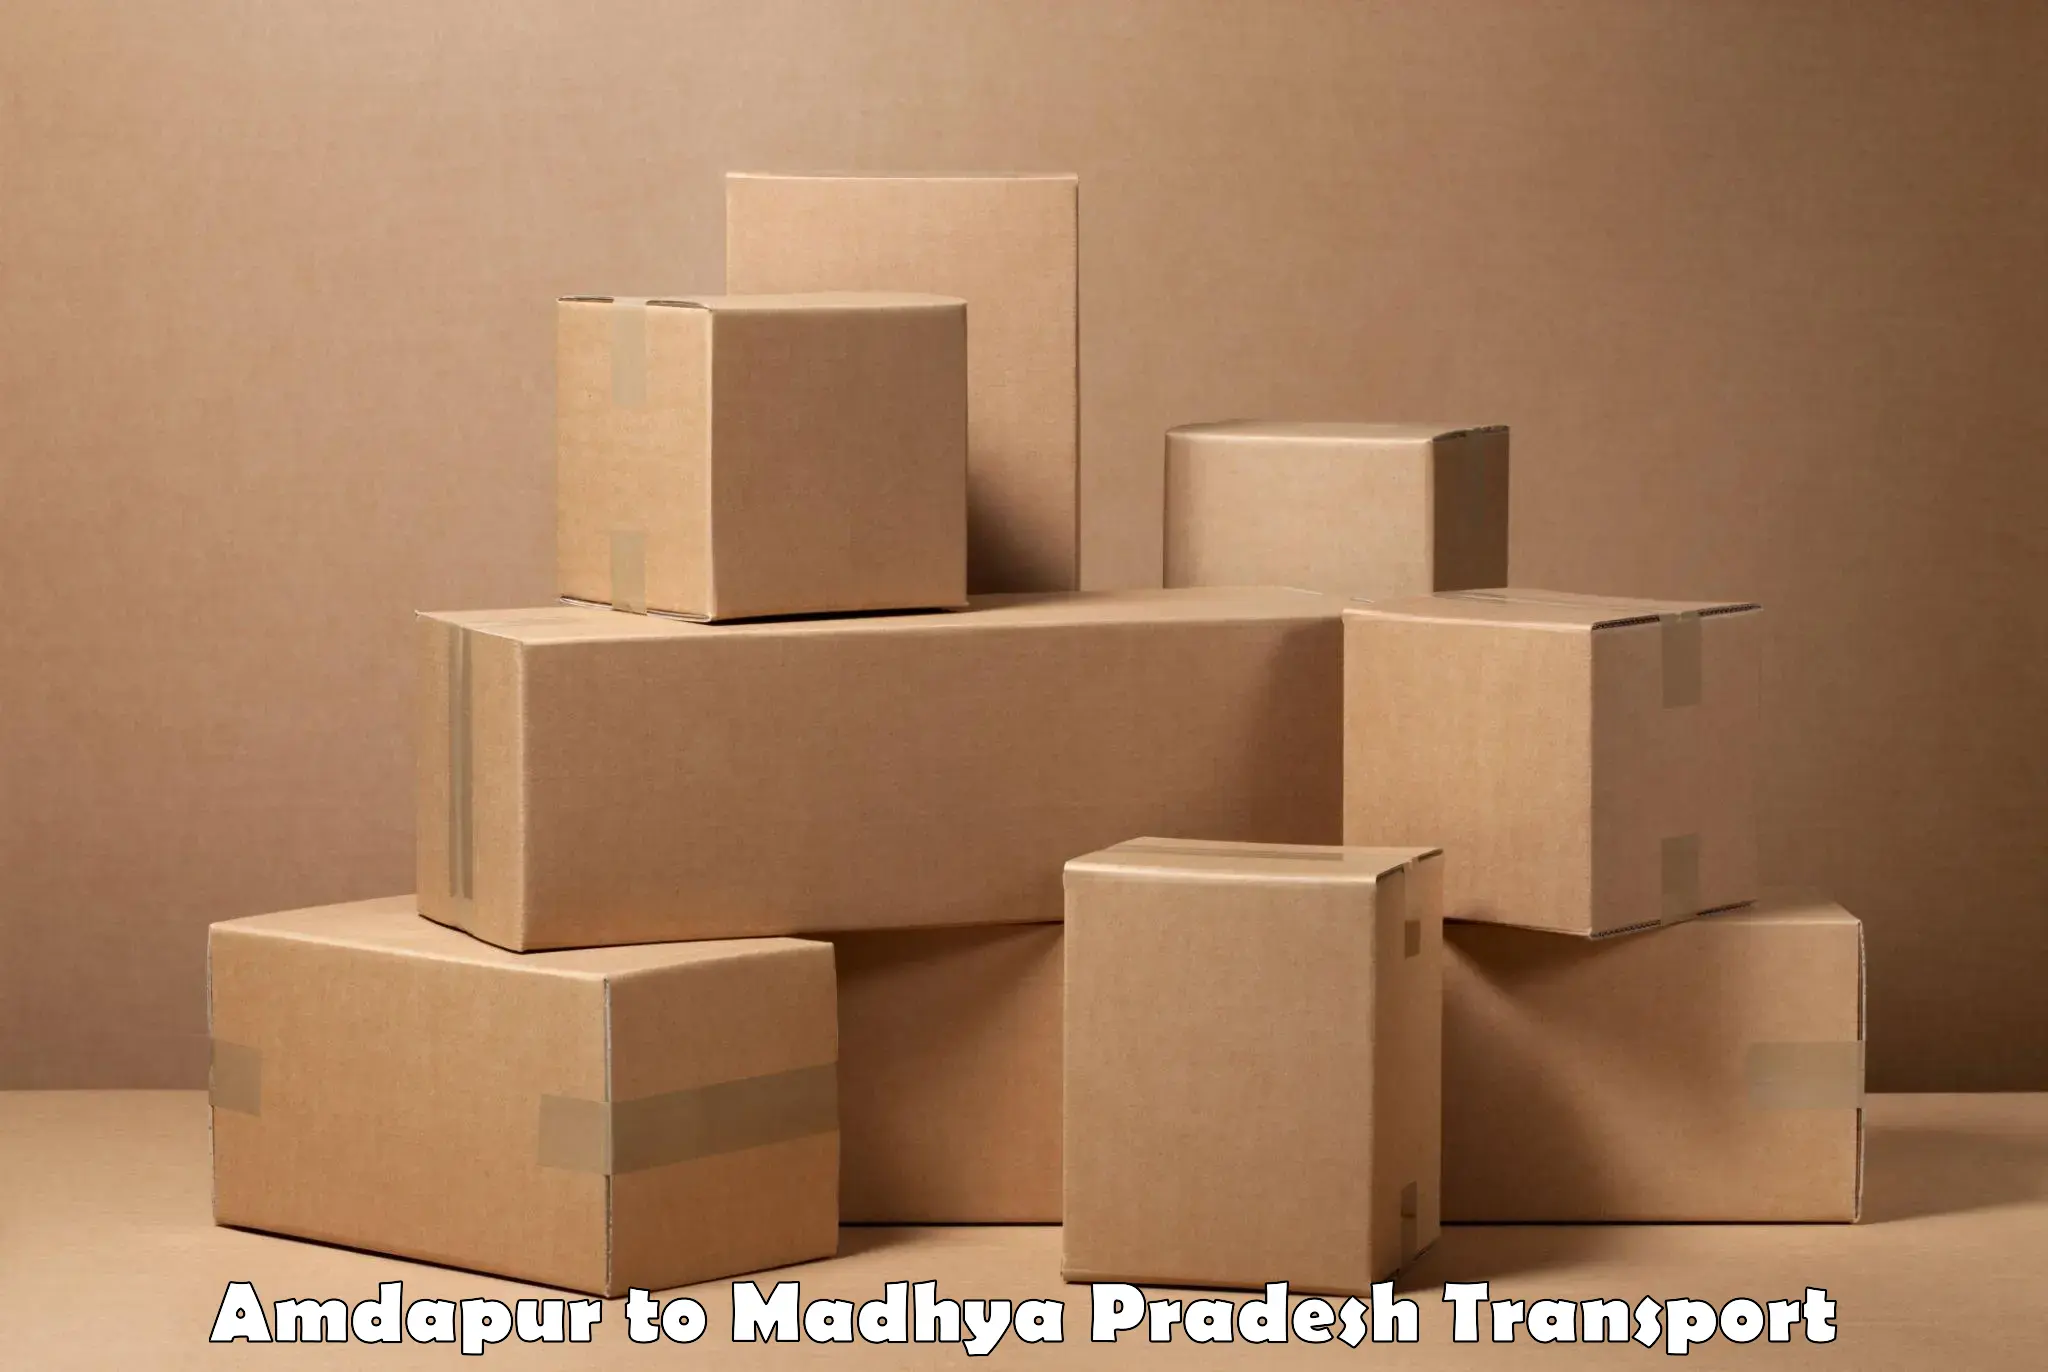 Package delivery services Amdapur to Binaganj